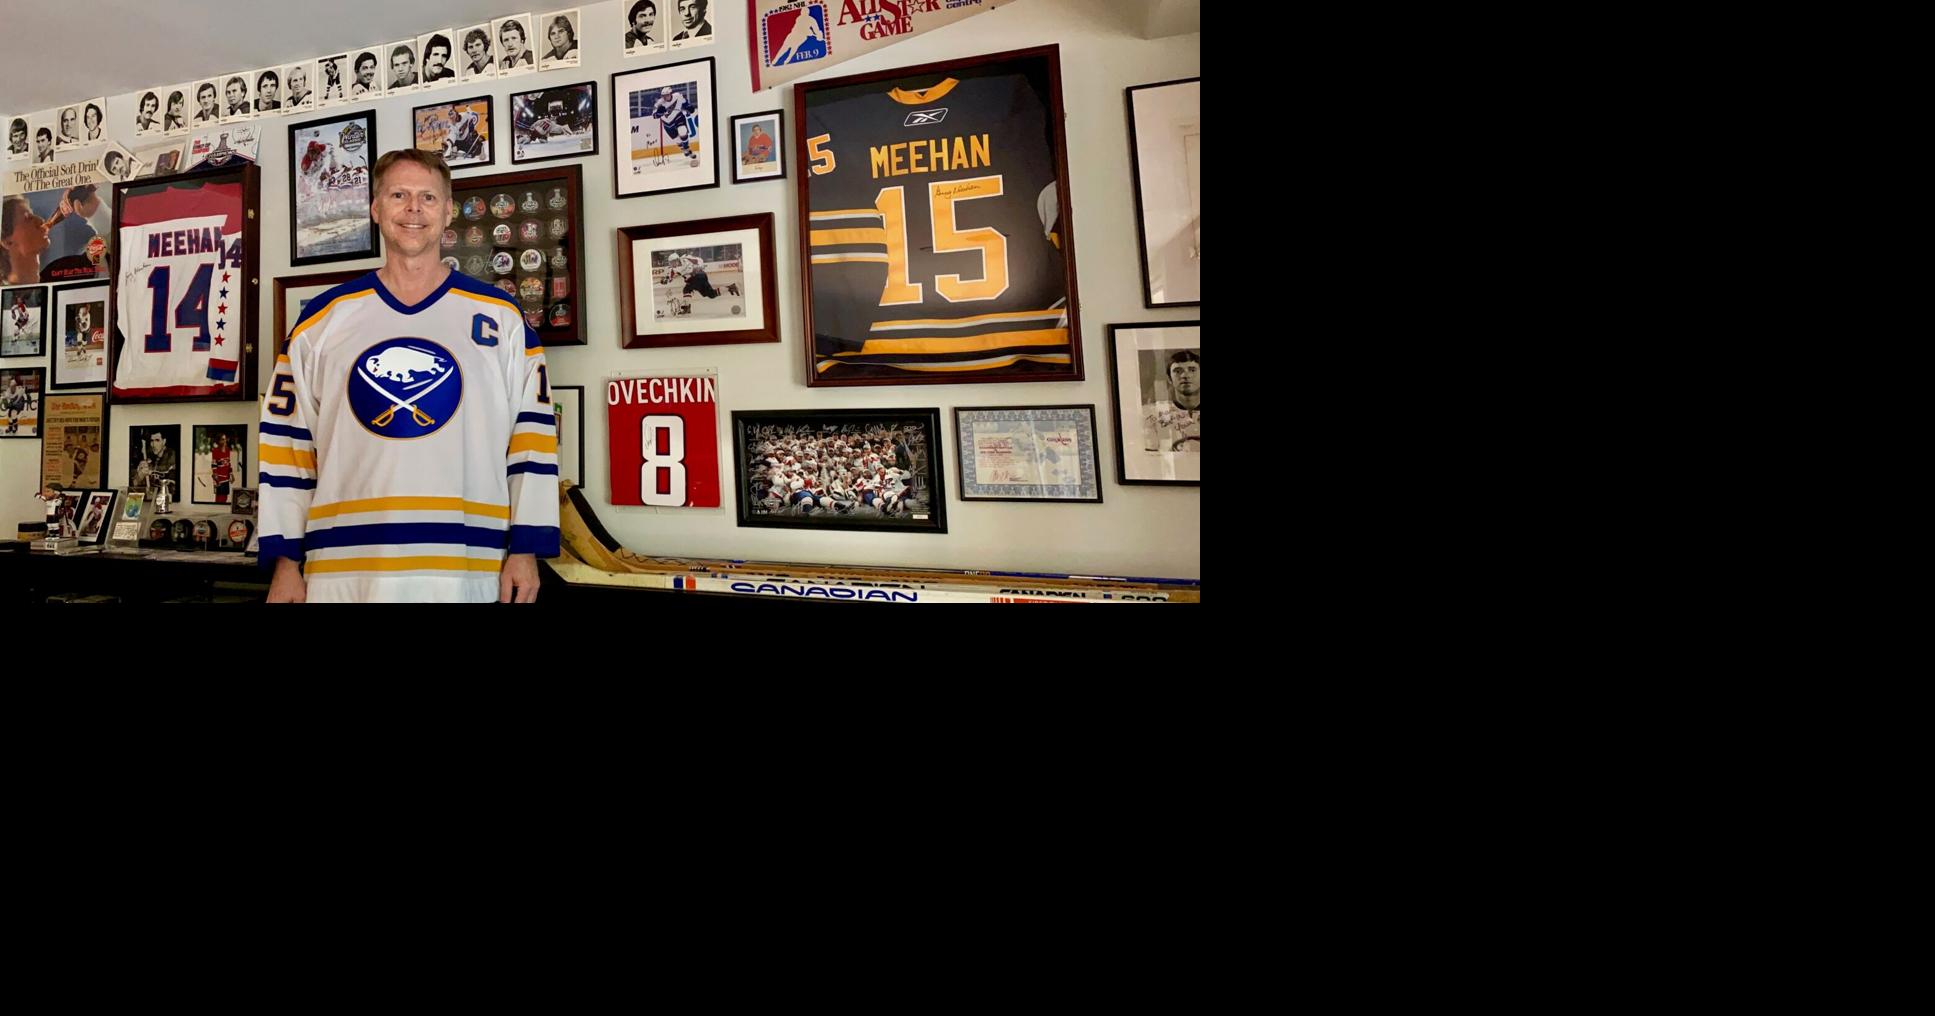 I have officially completed my Sabres jersey collection! I have